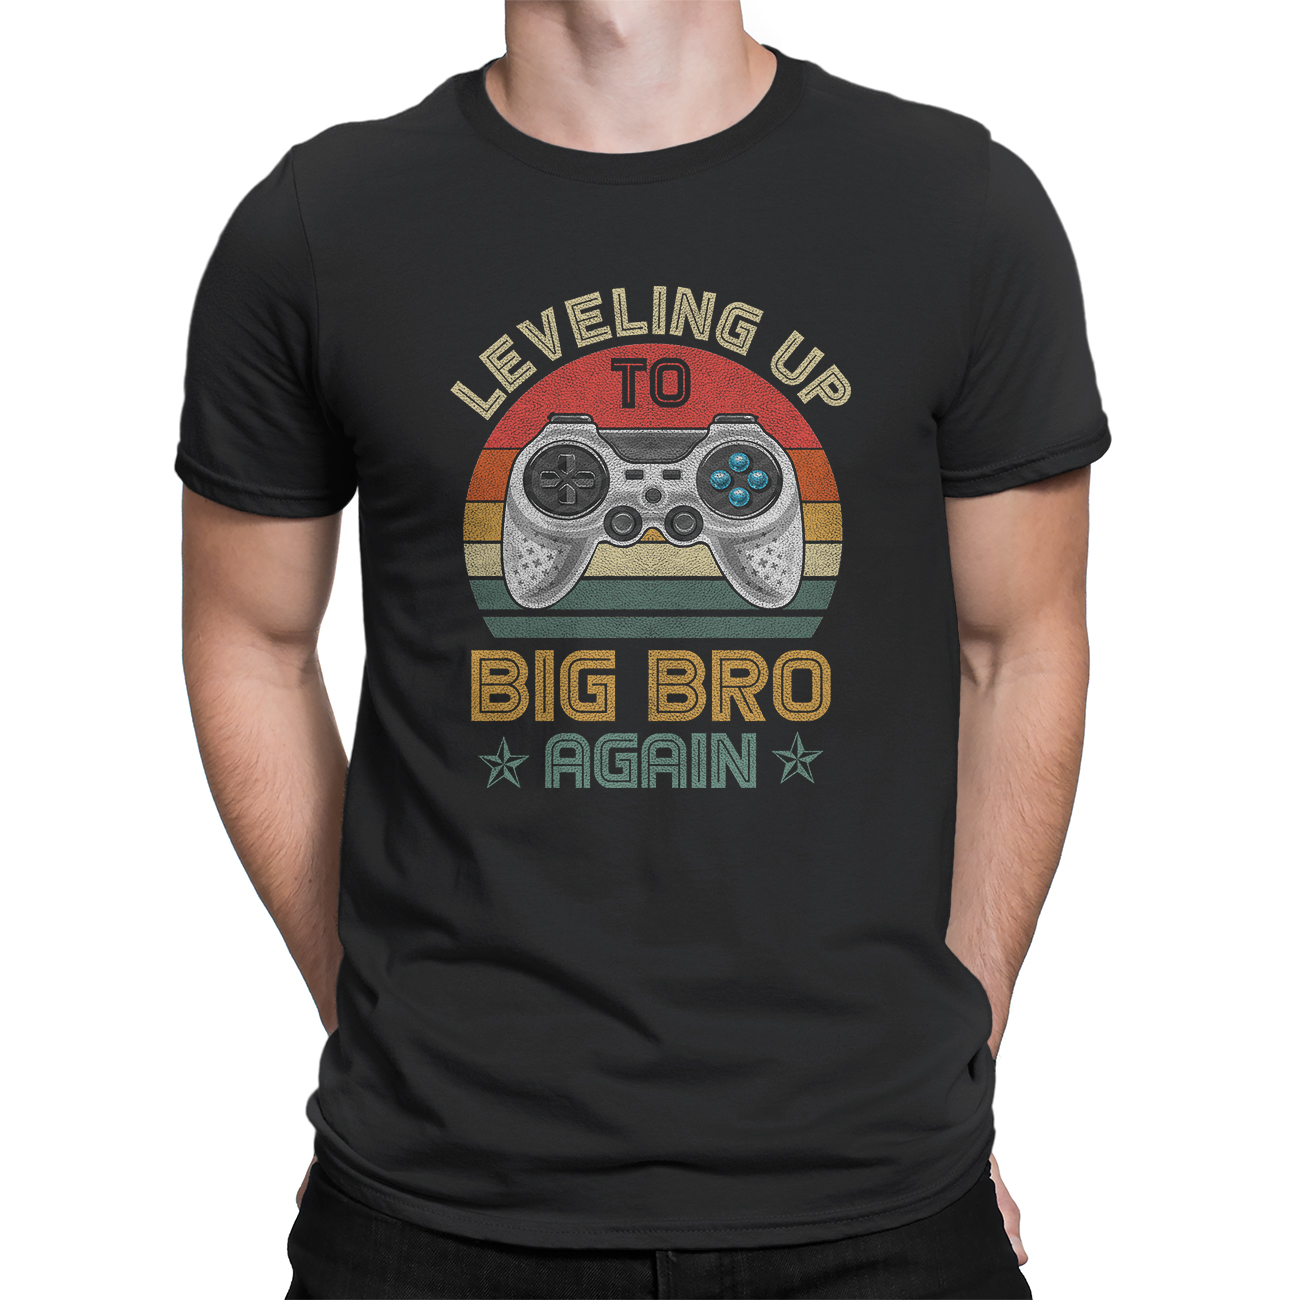 Men’s Vintage T-Shirt – Retro Style Leveling Up To Big Bro Again ...